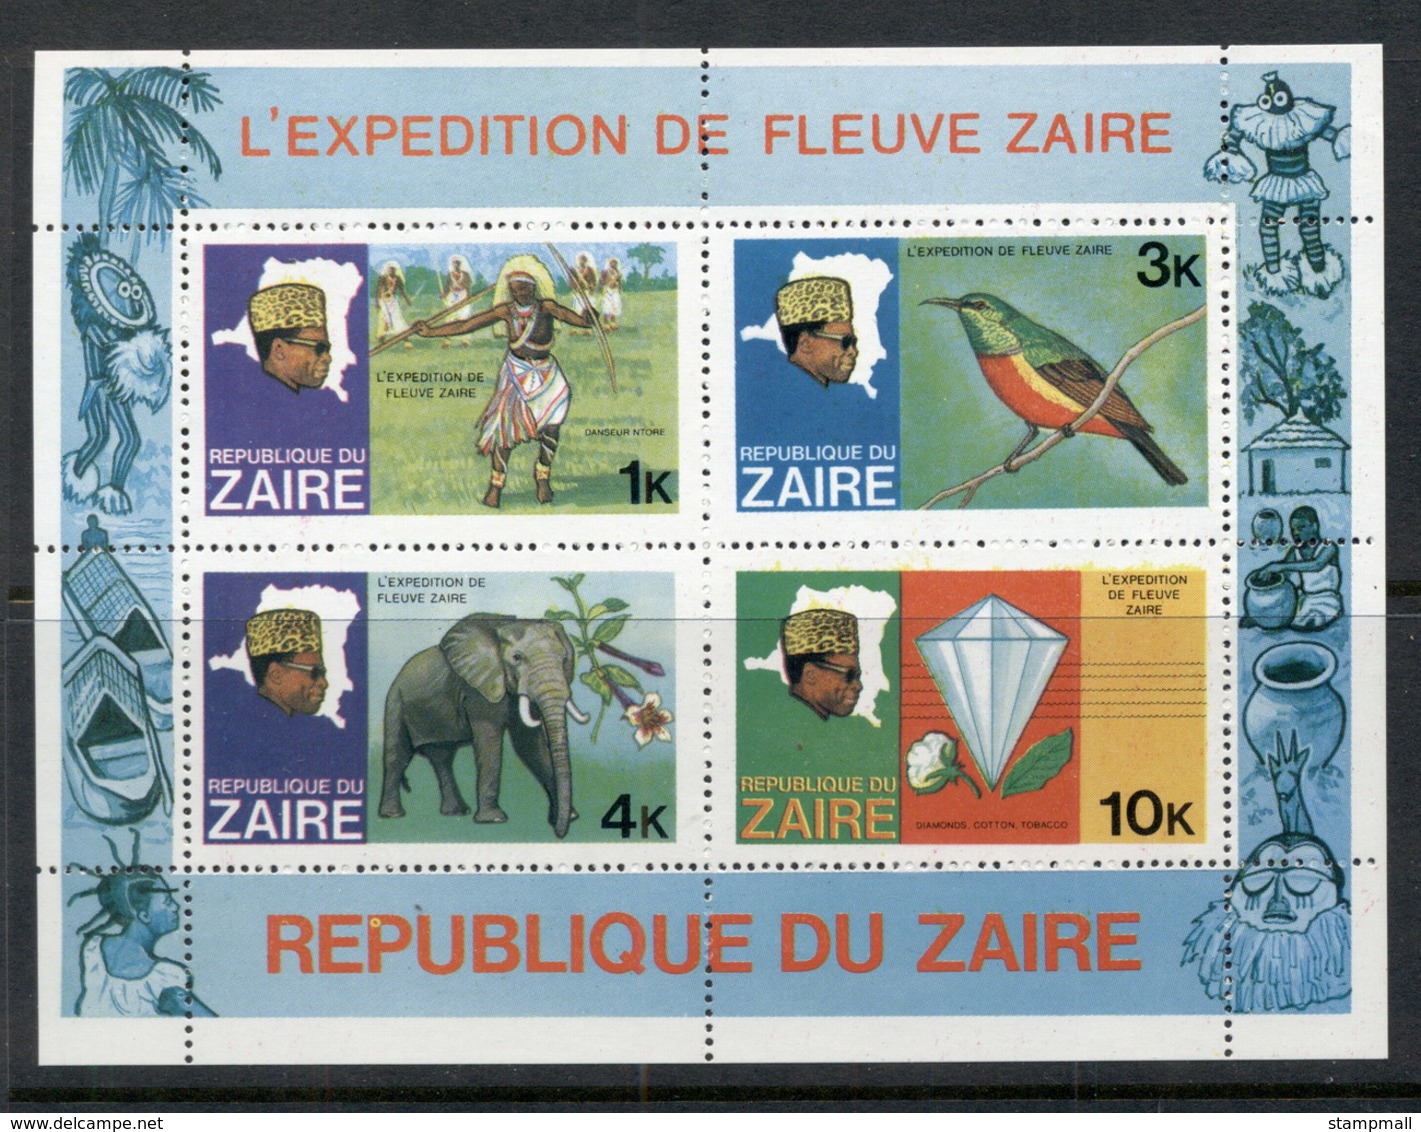 Zaire 1979 Zaire River Expedition, Elephant, Bird MS MUH - Africa (Other)